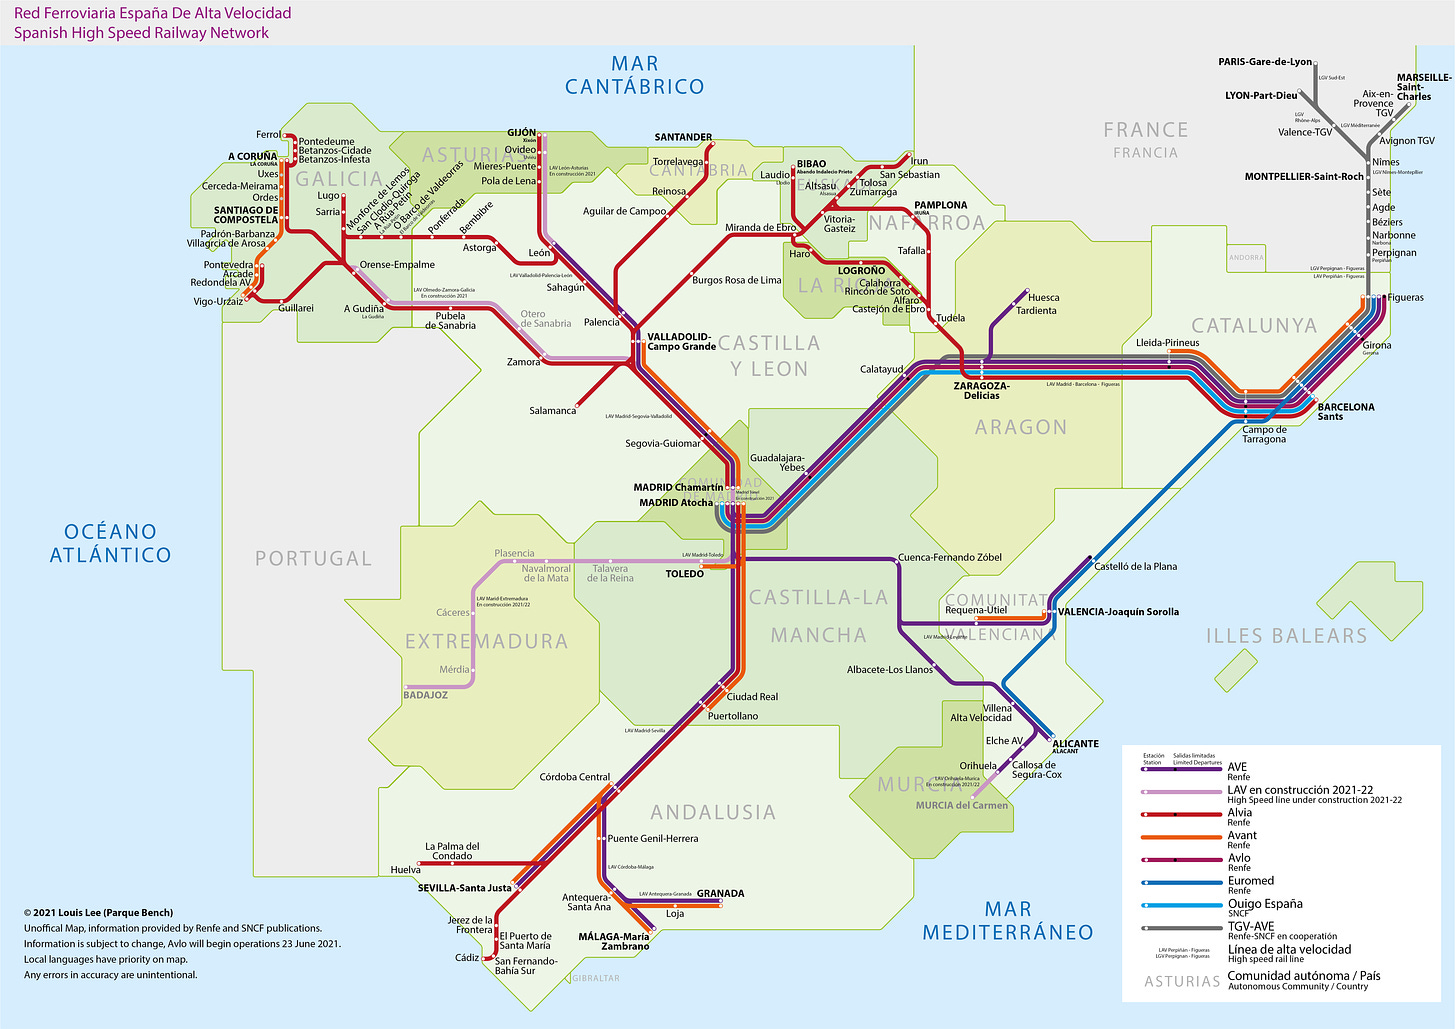 I've created a map of Spain's High Speed Rail Network : r/TransitDiagrams